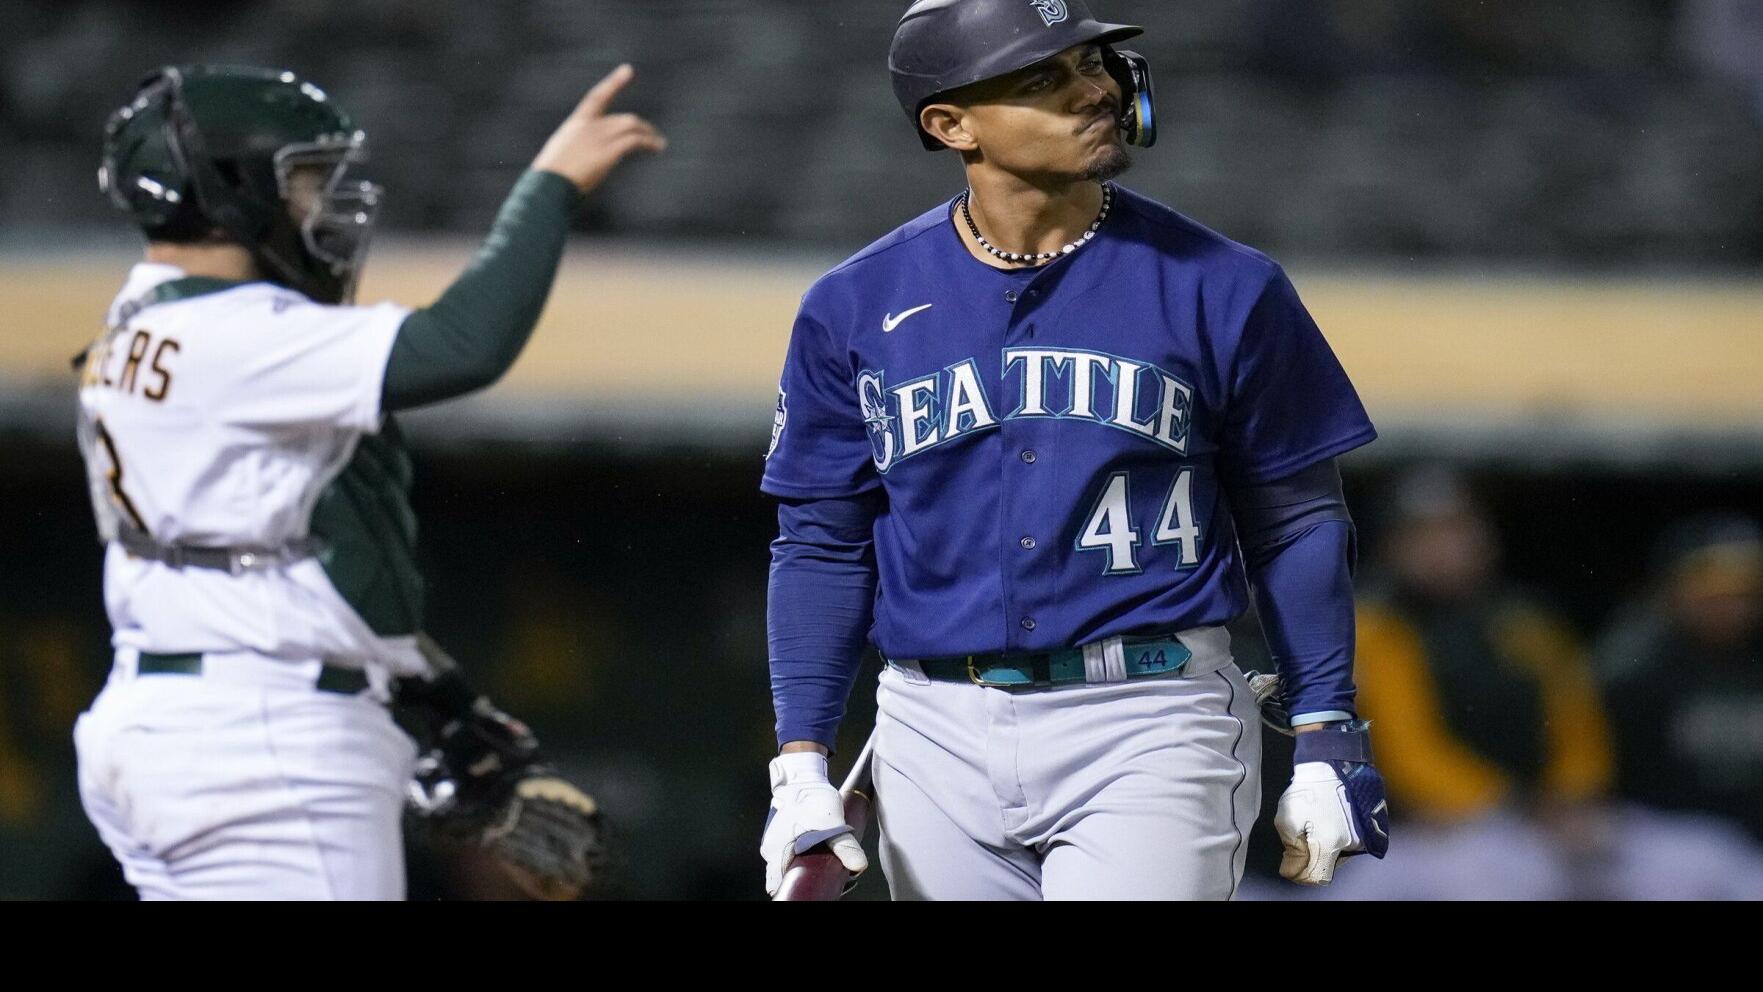 Mariners' 14-game winning streak ends with loss to Astros at T